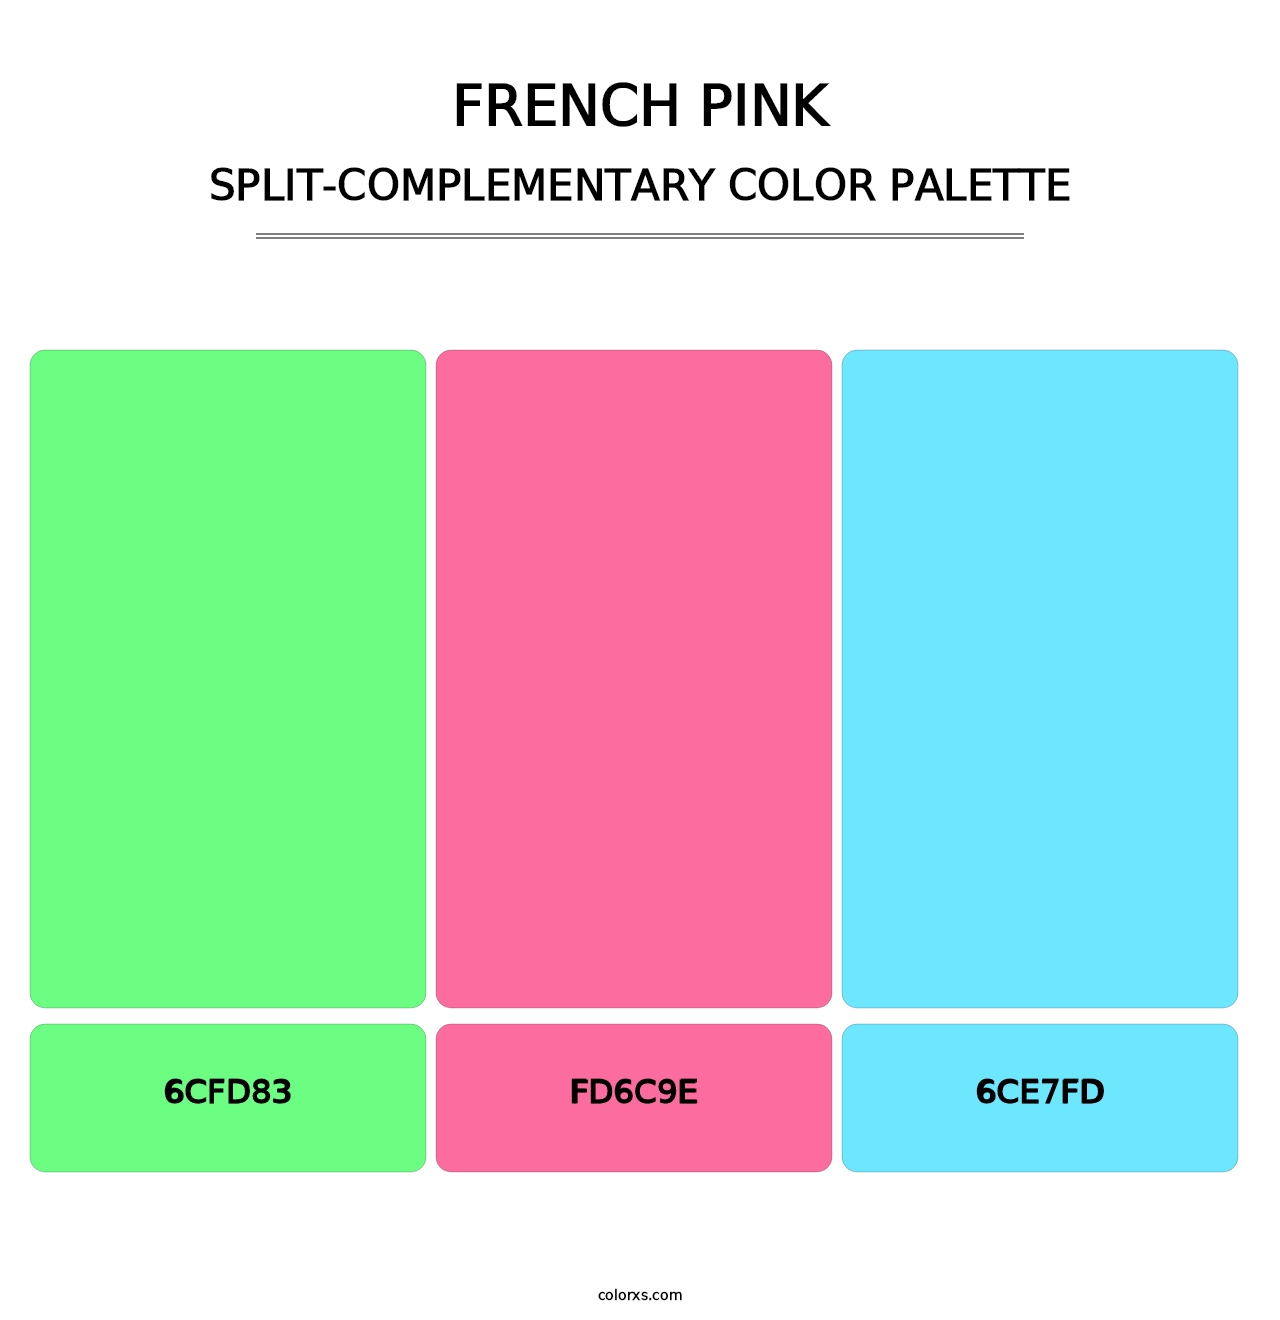 French Pink - Split-Complementary Color Palette